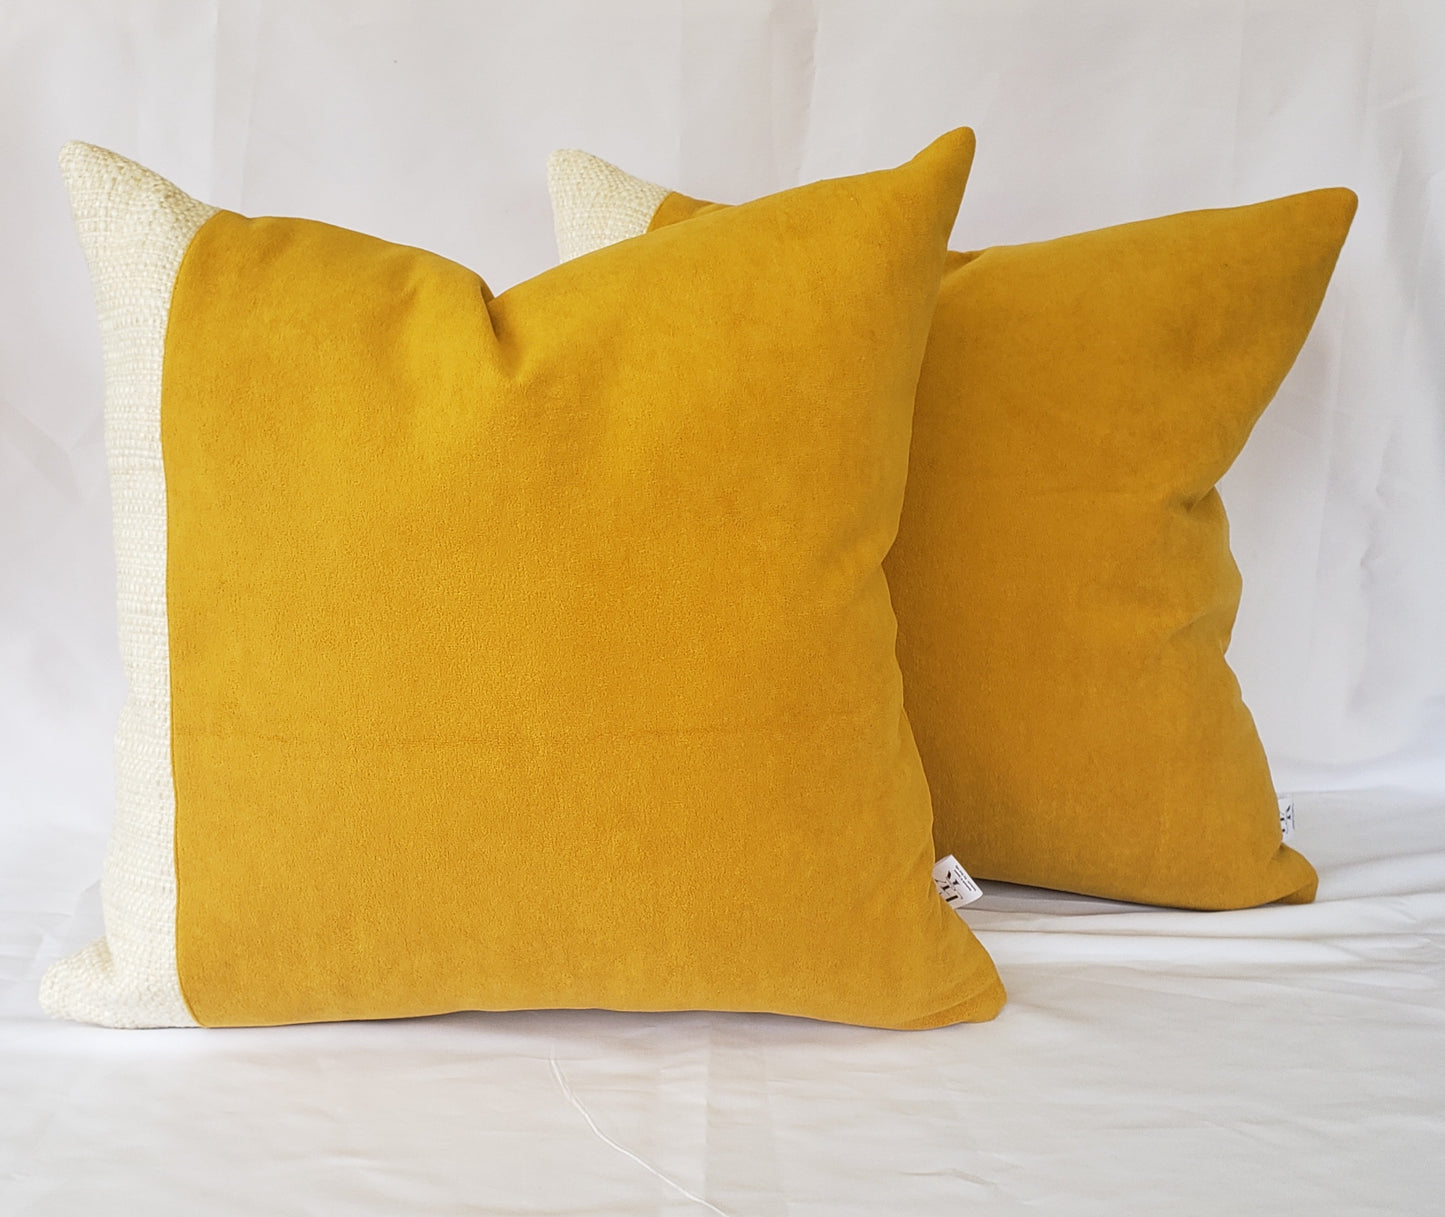 Elevate your home decor with our Fiokim Mustard Deluxe Square Pillow Cover. Crafted with luxurious mustard suede-like fabric, this designer pillow features a sophisticated woven ivory and beige design. Perfect for your sofa or bedroom, its matching reverse and double stitched, sealed edges add a touch of elegance. The invisible zipper ensures a seamless and polished look.
Advenique Home Decor luxury square pillows 